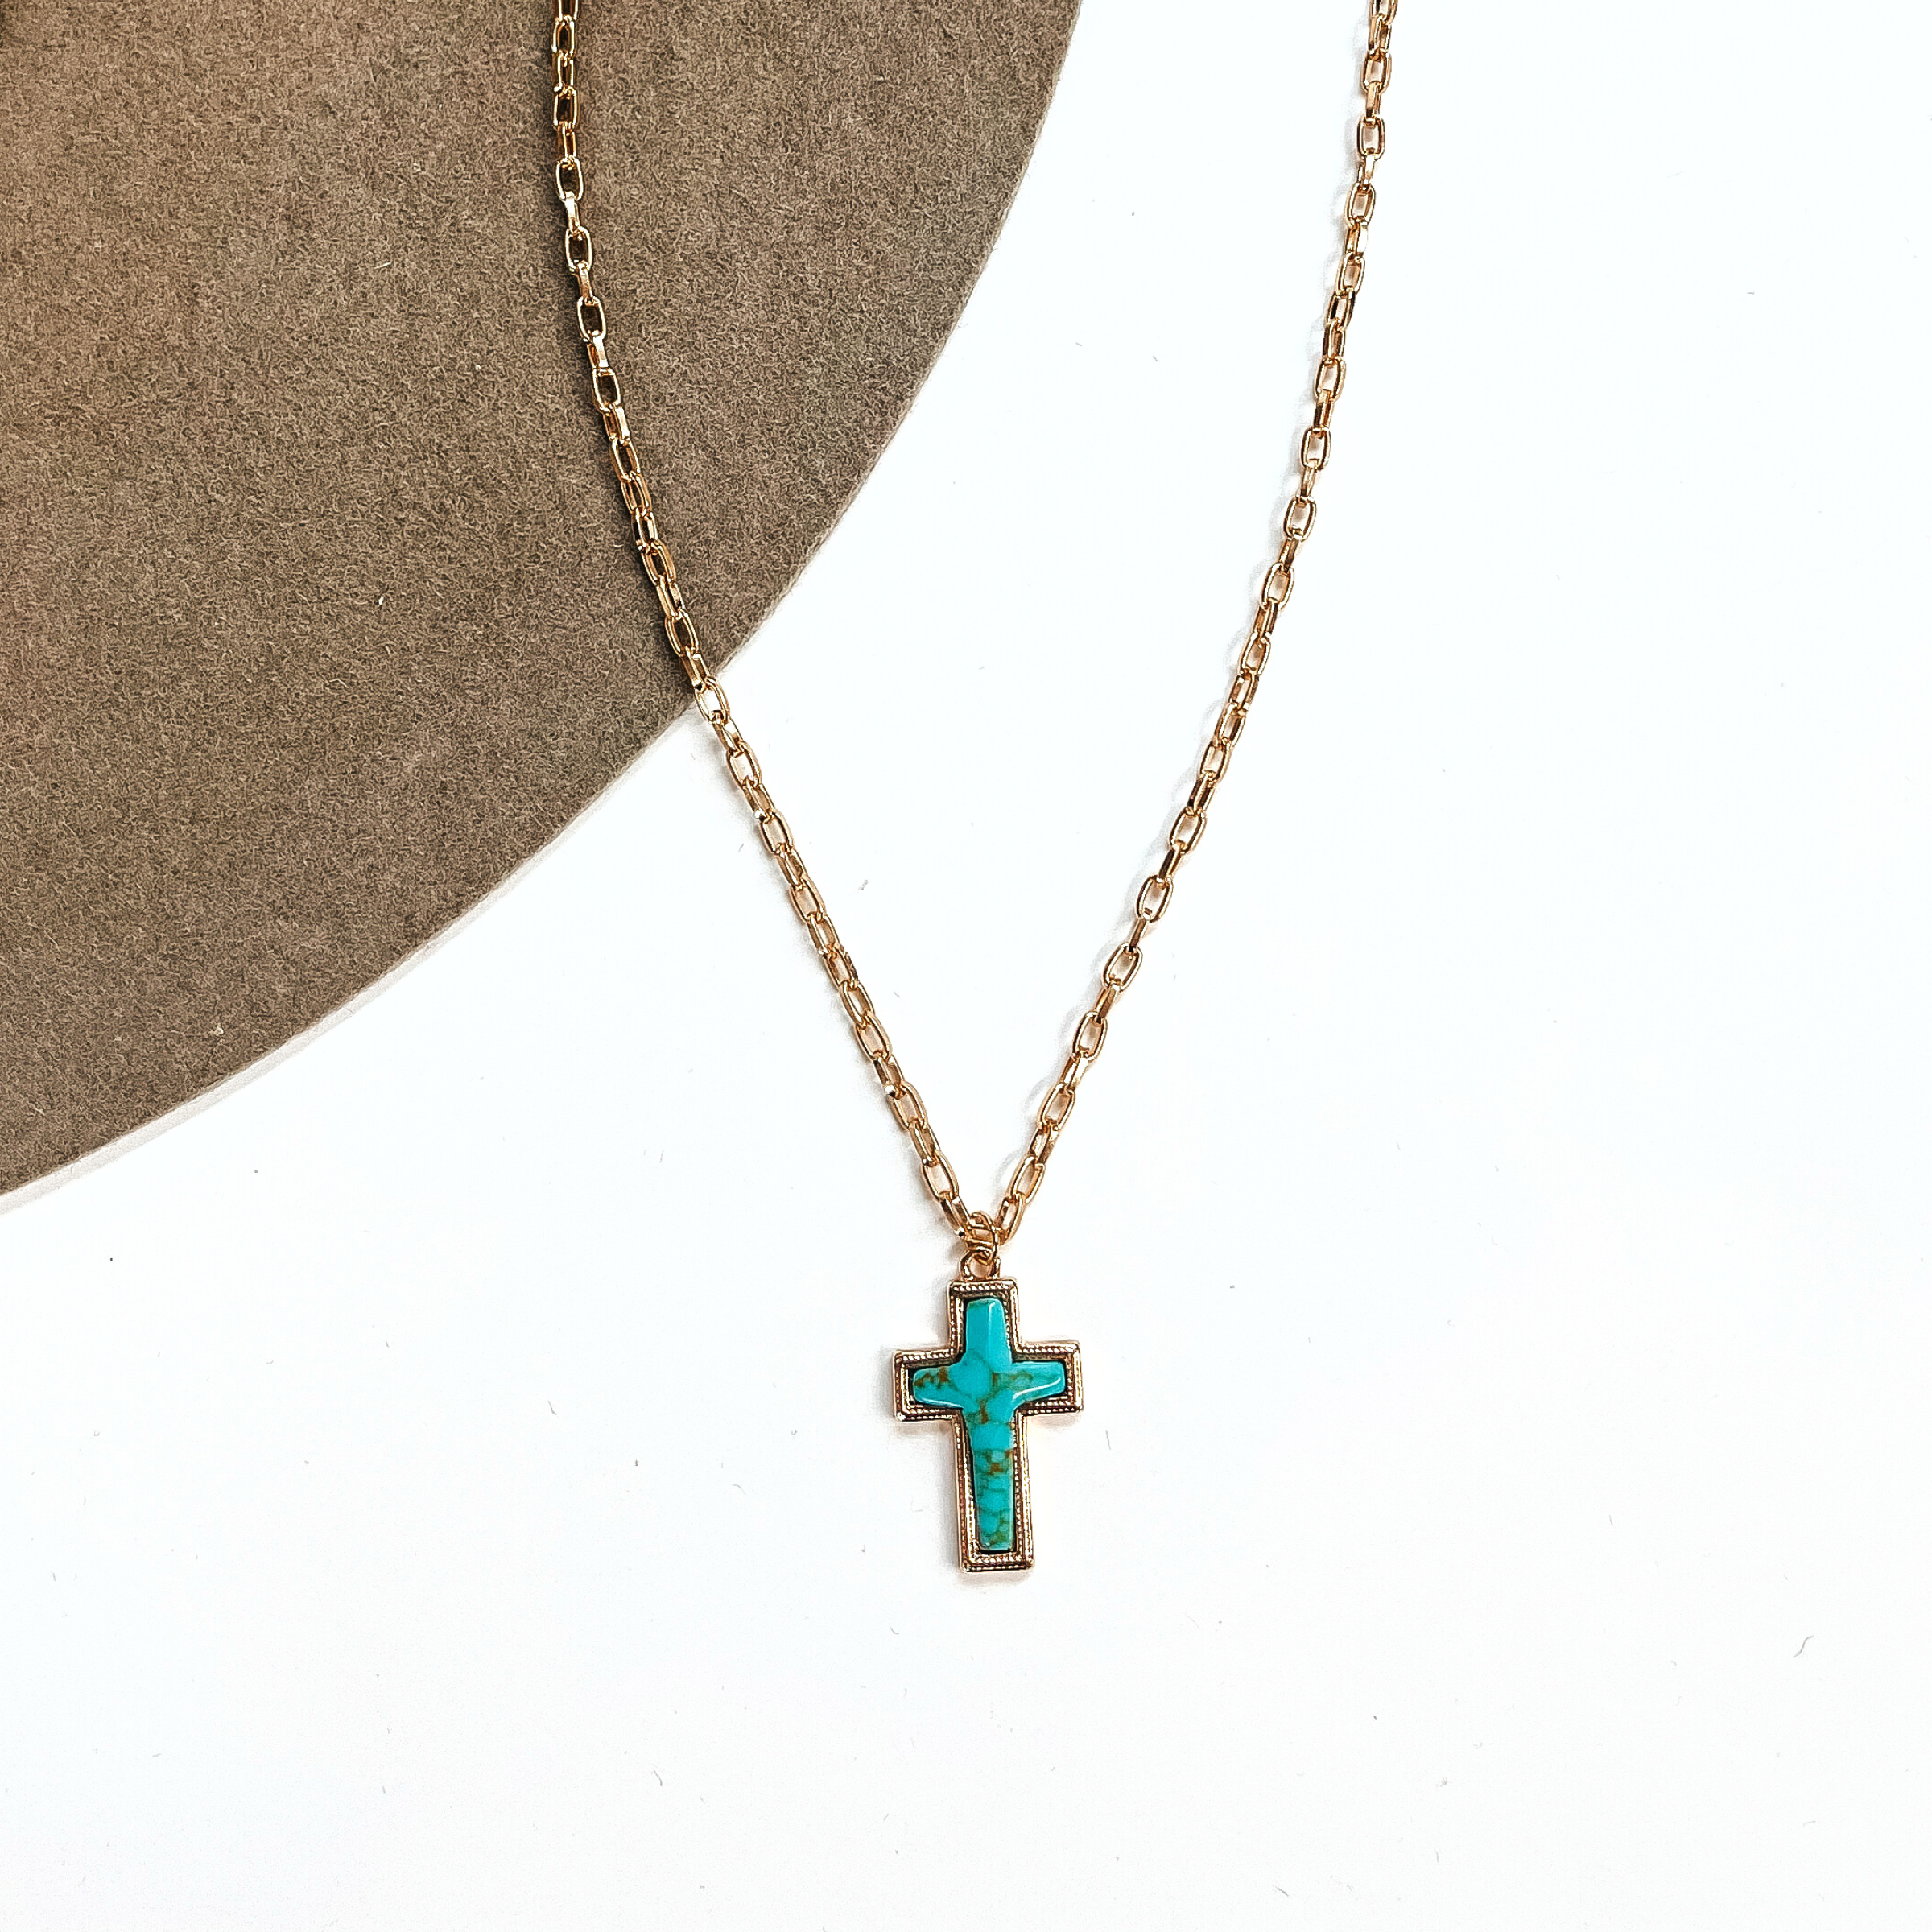 This is a thin gold tone chain necklace with a small cross pendant in the center. The  pendant has a turqouise stone shaped as a cross, the stone is in a gold setting. This  necklace is laying on a white background and on a light brown felt hat brim.